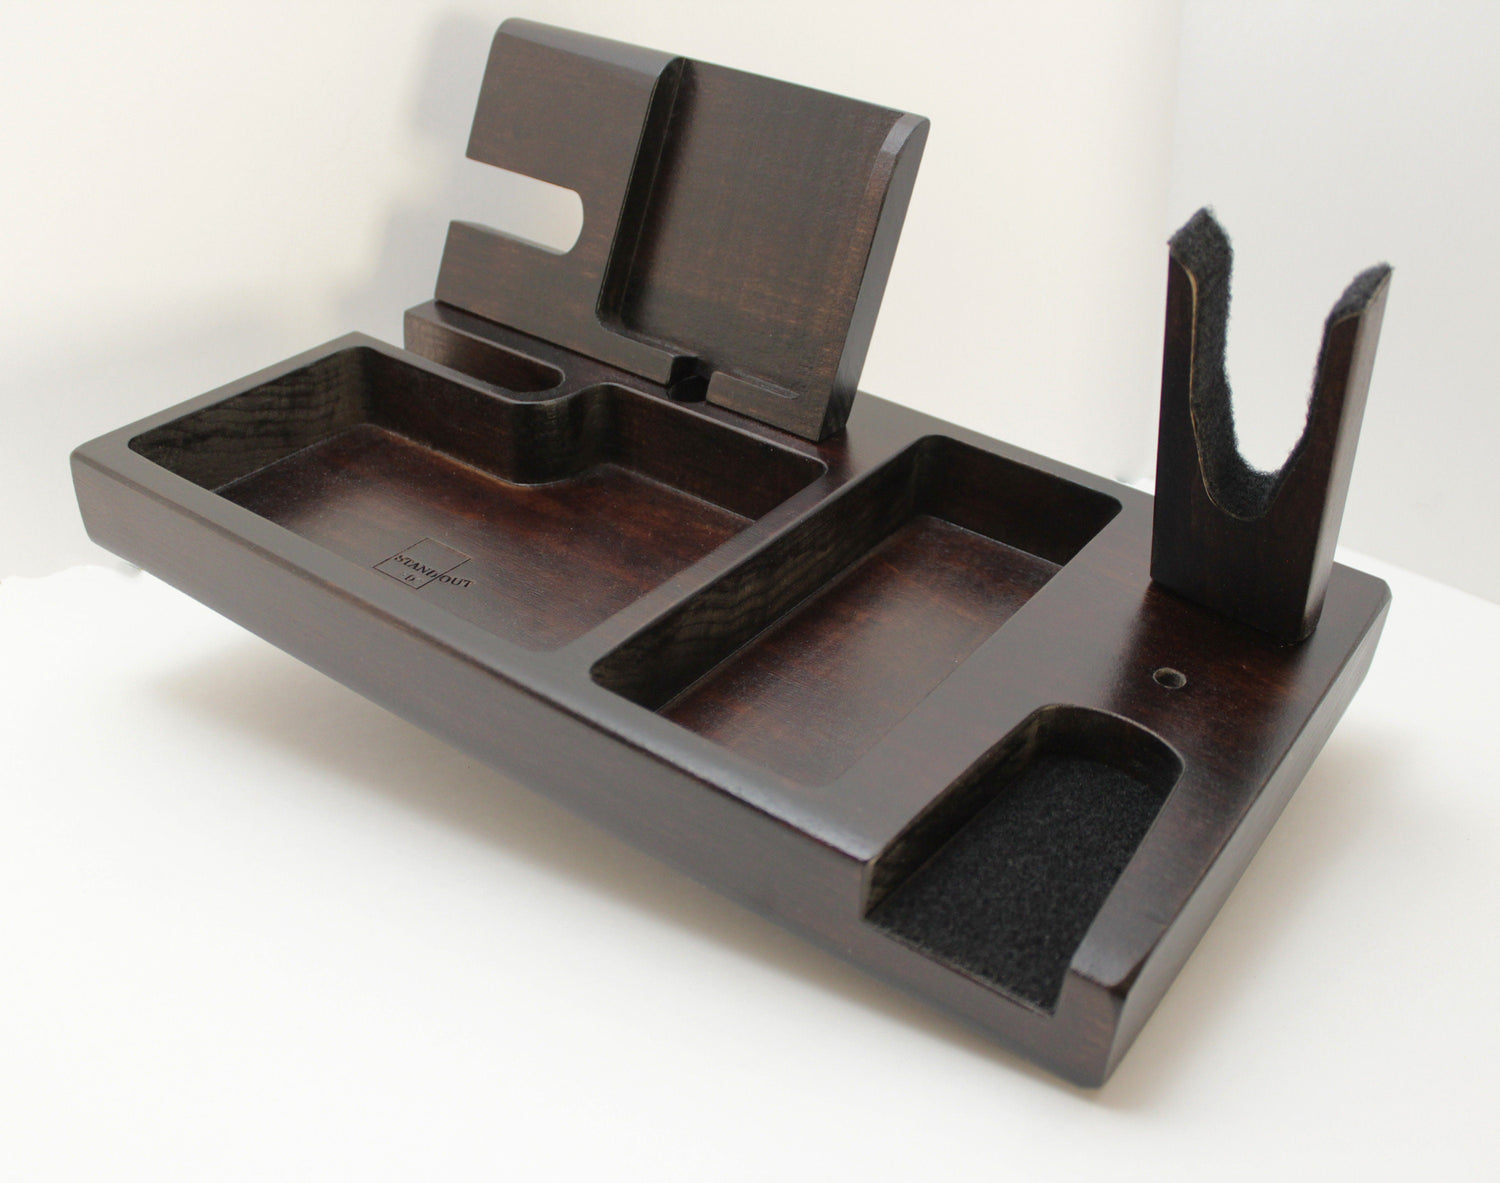 DOCKING STATION - WOODEN Dock Station - Watch Organizer And Charging Station - Tech Gifts For Men - Wooden Gun Stand